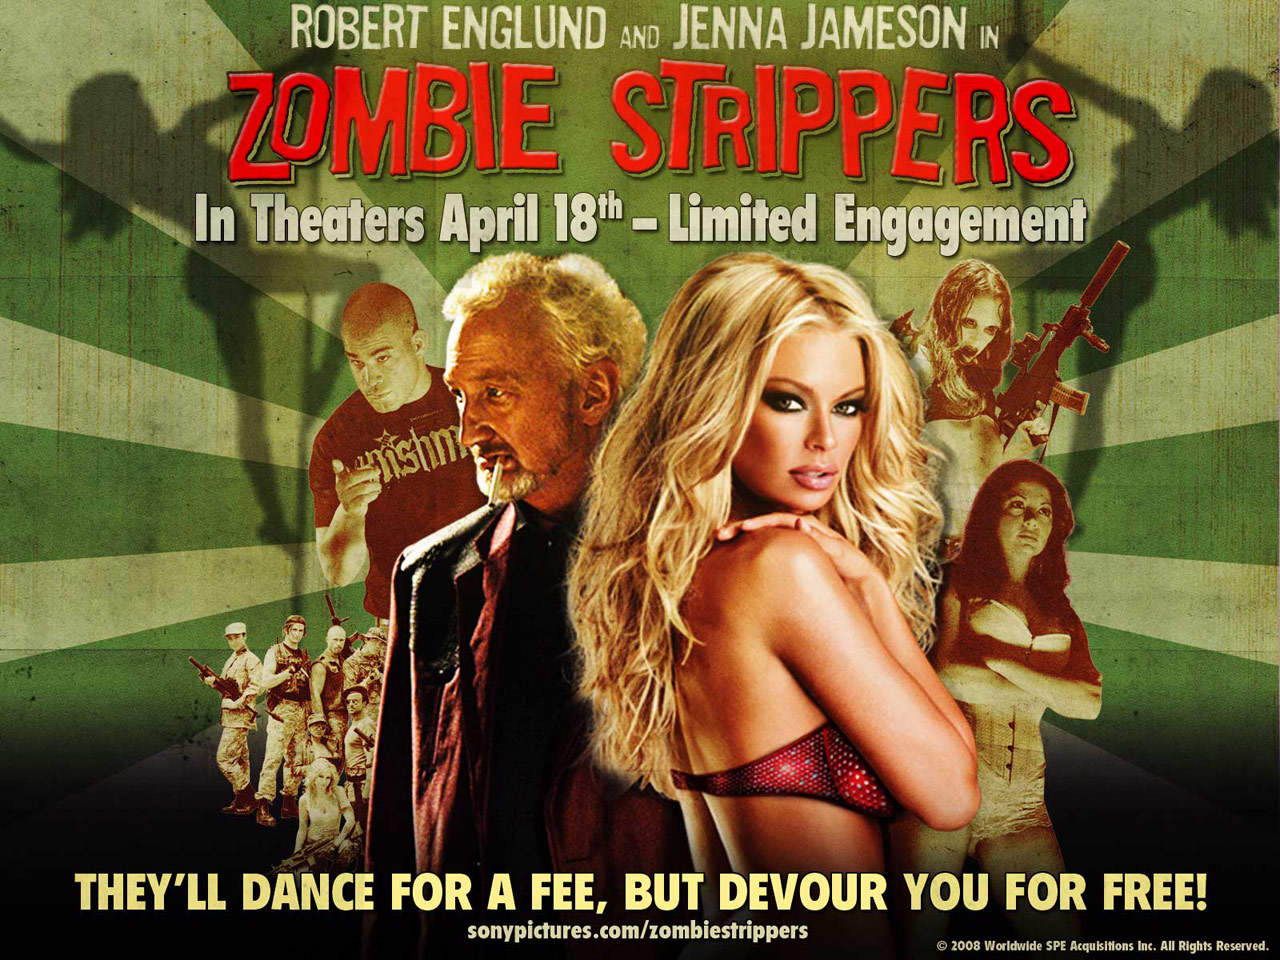 This movie is so bad it made me hate zombie movies AND naked women for about 